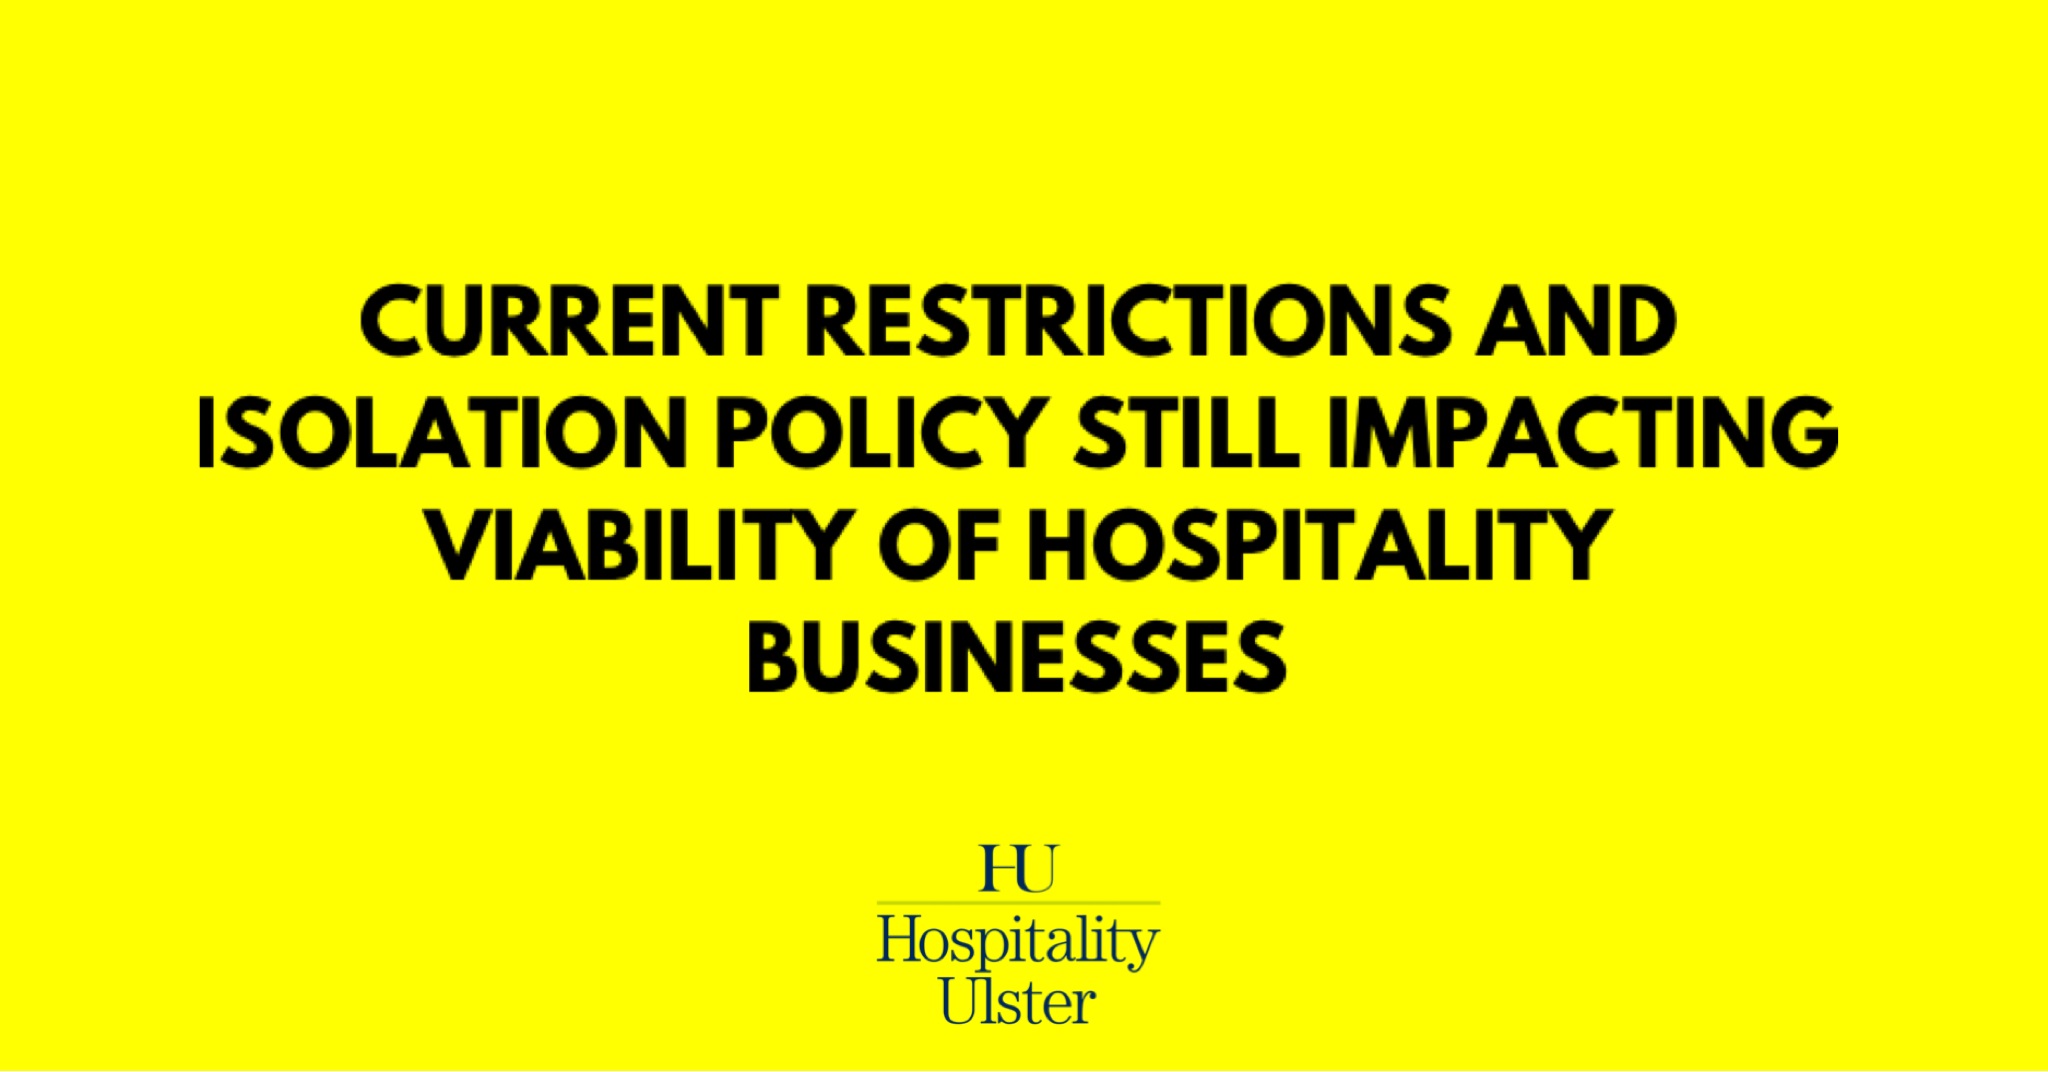 CURRENT RESTRICTIONS AND ISOLATION POLICY STILL IMPACTING VIABILITY OF HOSPITALITY BUSINESSES